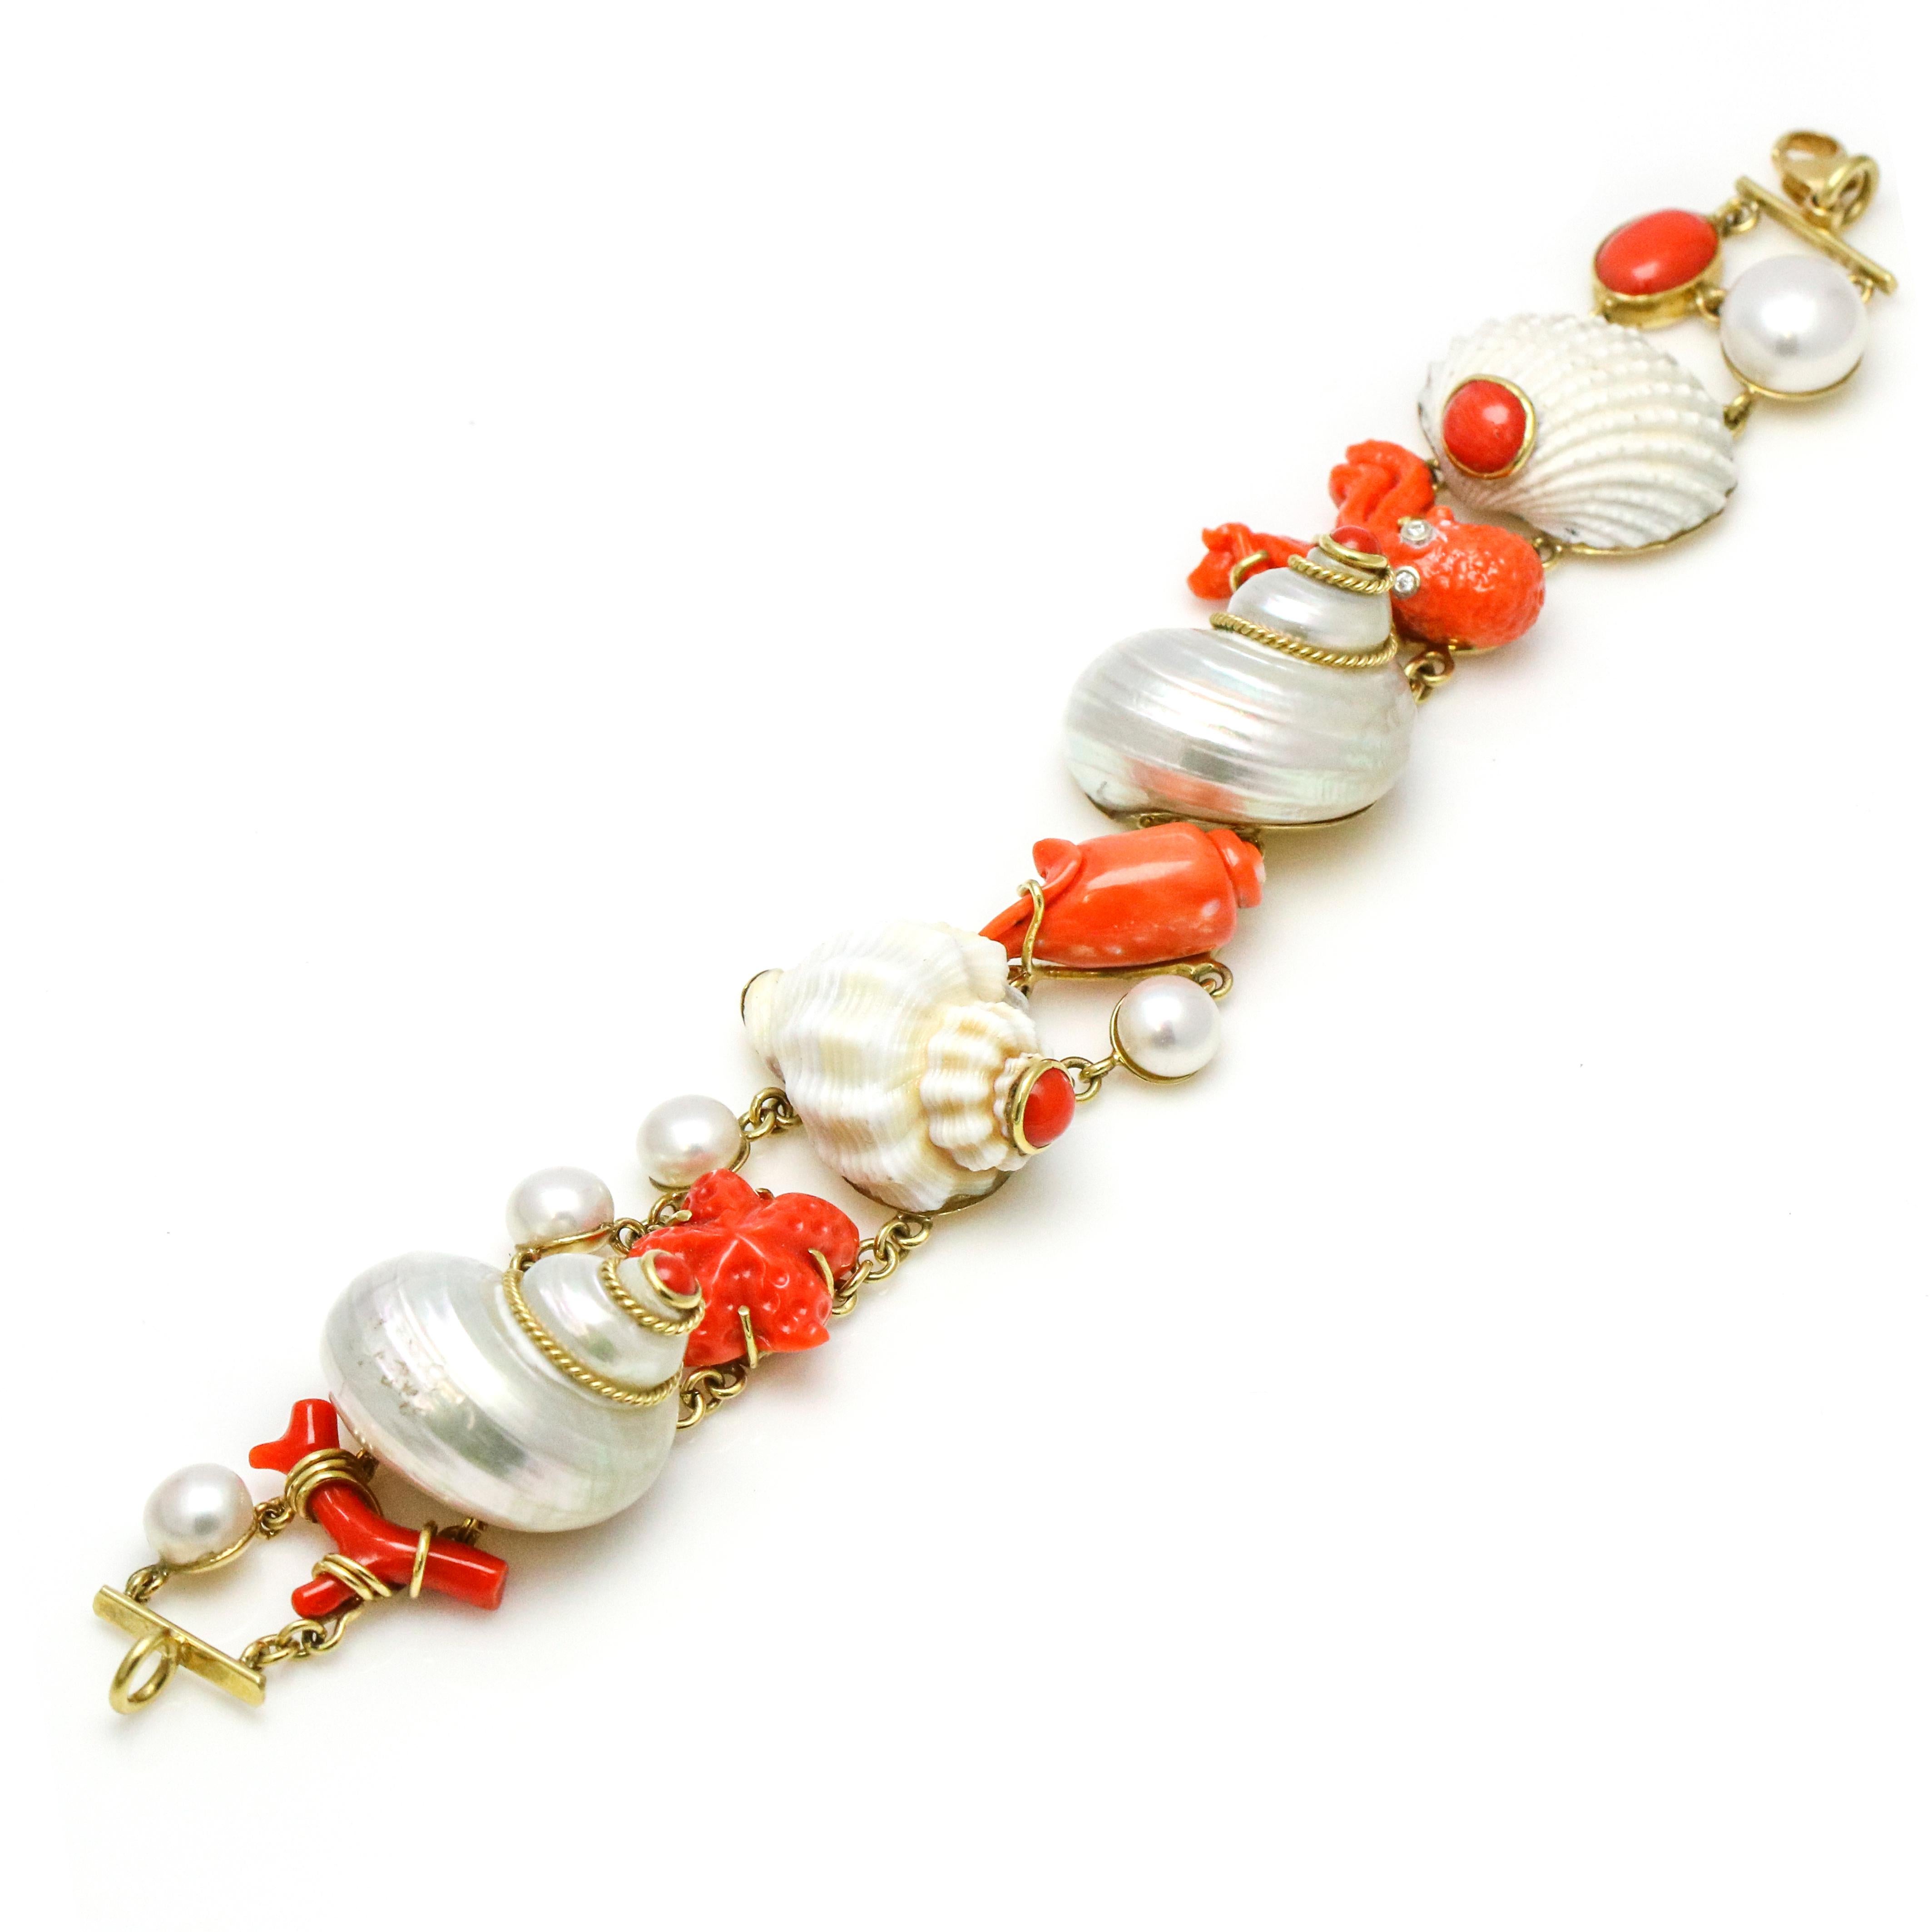 Mazza Company shell, coral, diamond and pearl sea life charm bracelet in 18k yellow gold from the Grotto collection. Size, medium. Lobster clasp.

Width, 25mm
Height, 21mm
Weight, 50.5 grams
Carat Weight, .05 carat